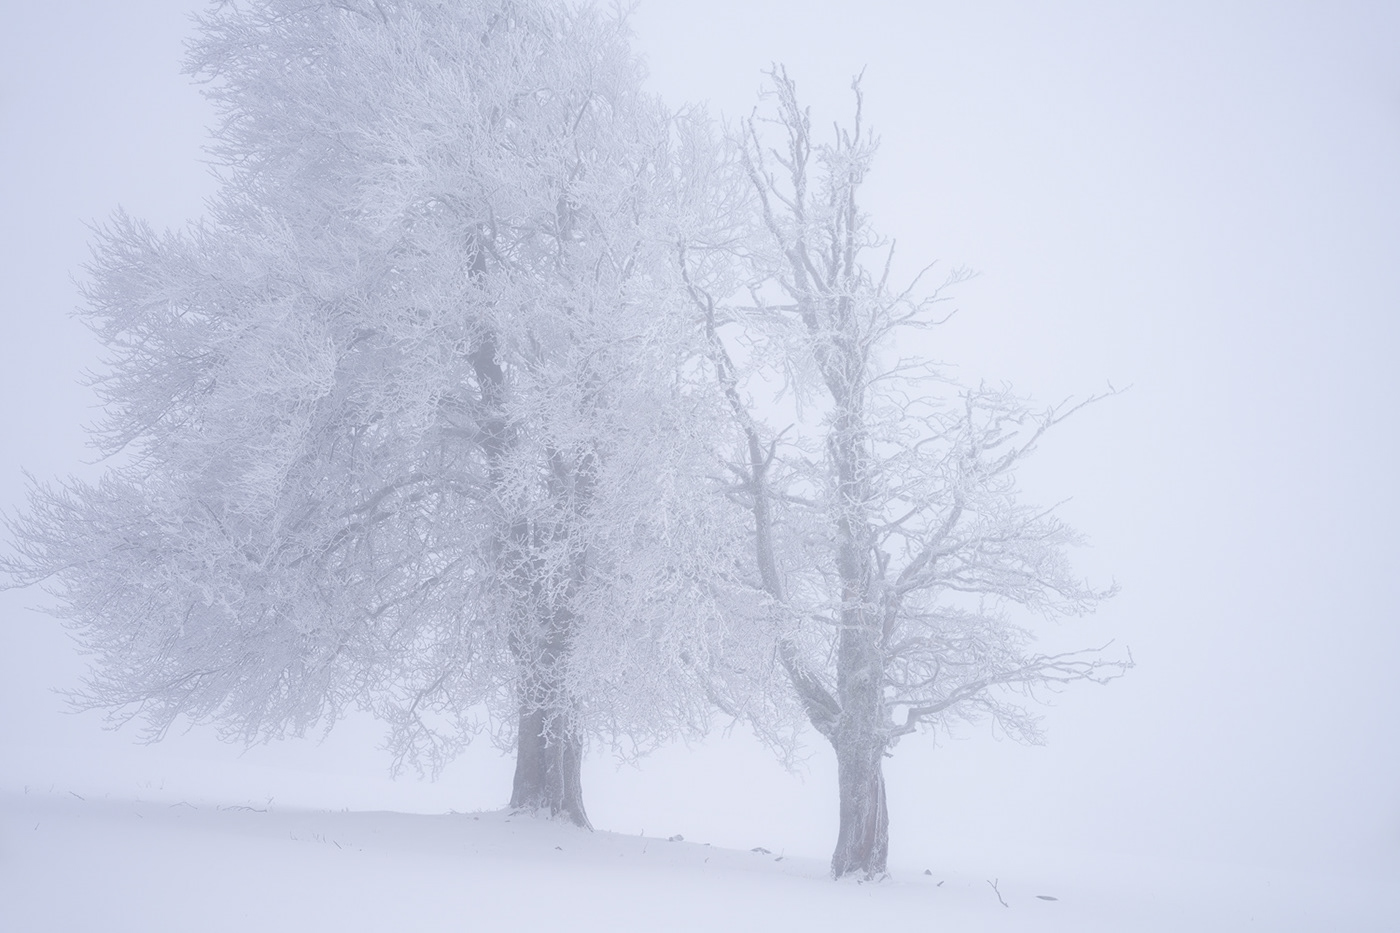 Landscape Nature Photography  snow winter Treescape Grove Beech Tree  hoarfrost whiteout